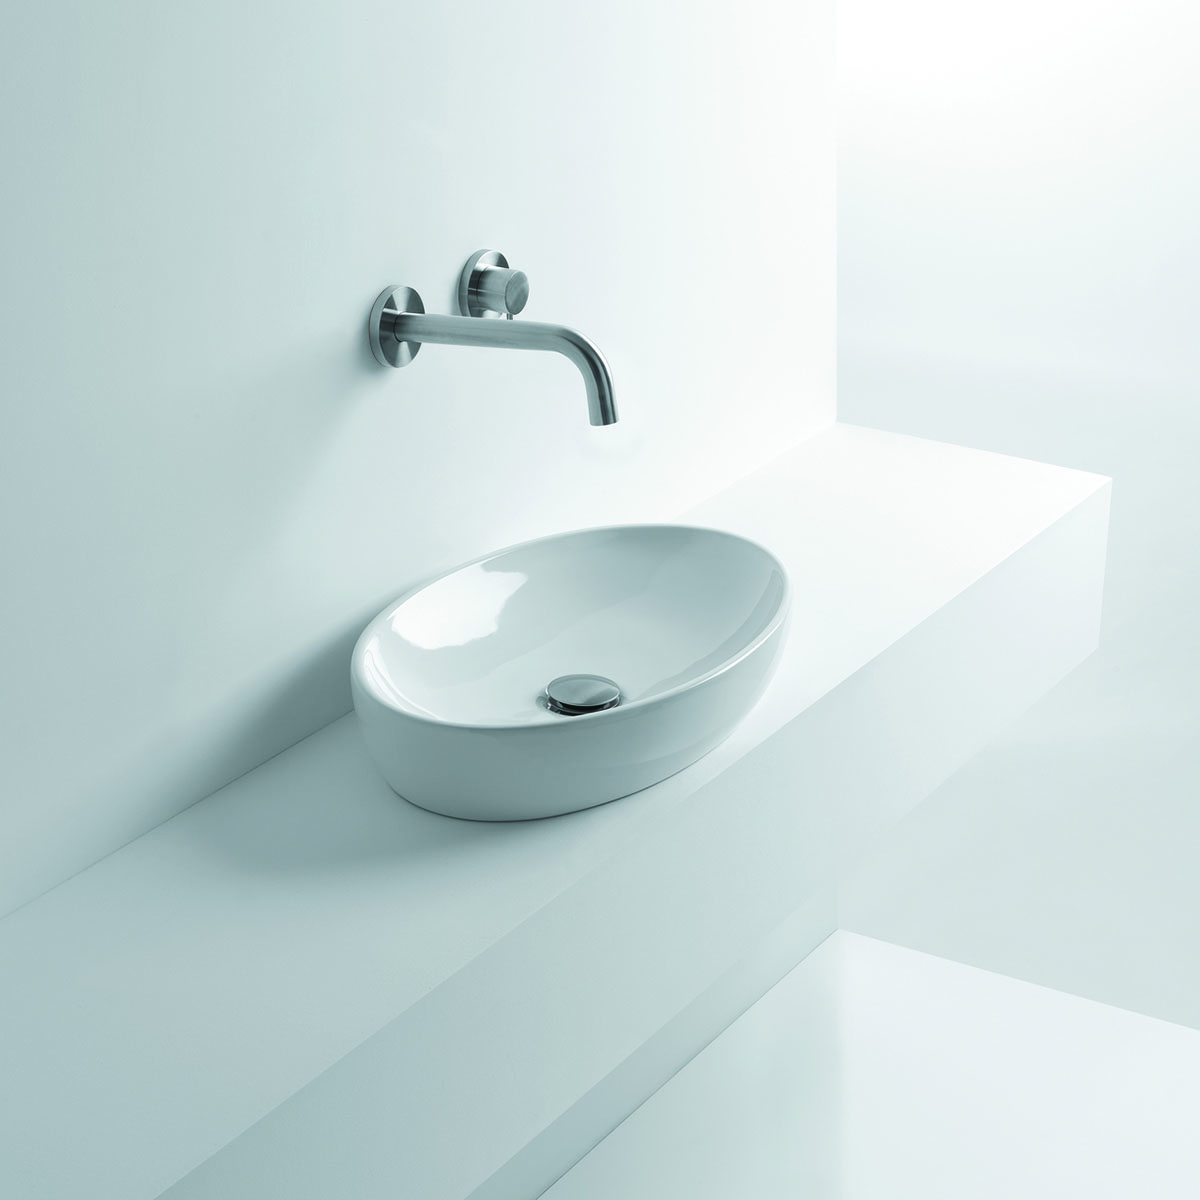 H10 40C by WS Bath Collections, 15.7 x 12.6 x 4.0, Vessel (countertop) Bathroom Sink in Ceramic White